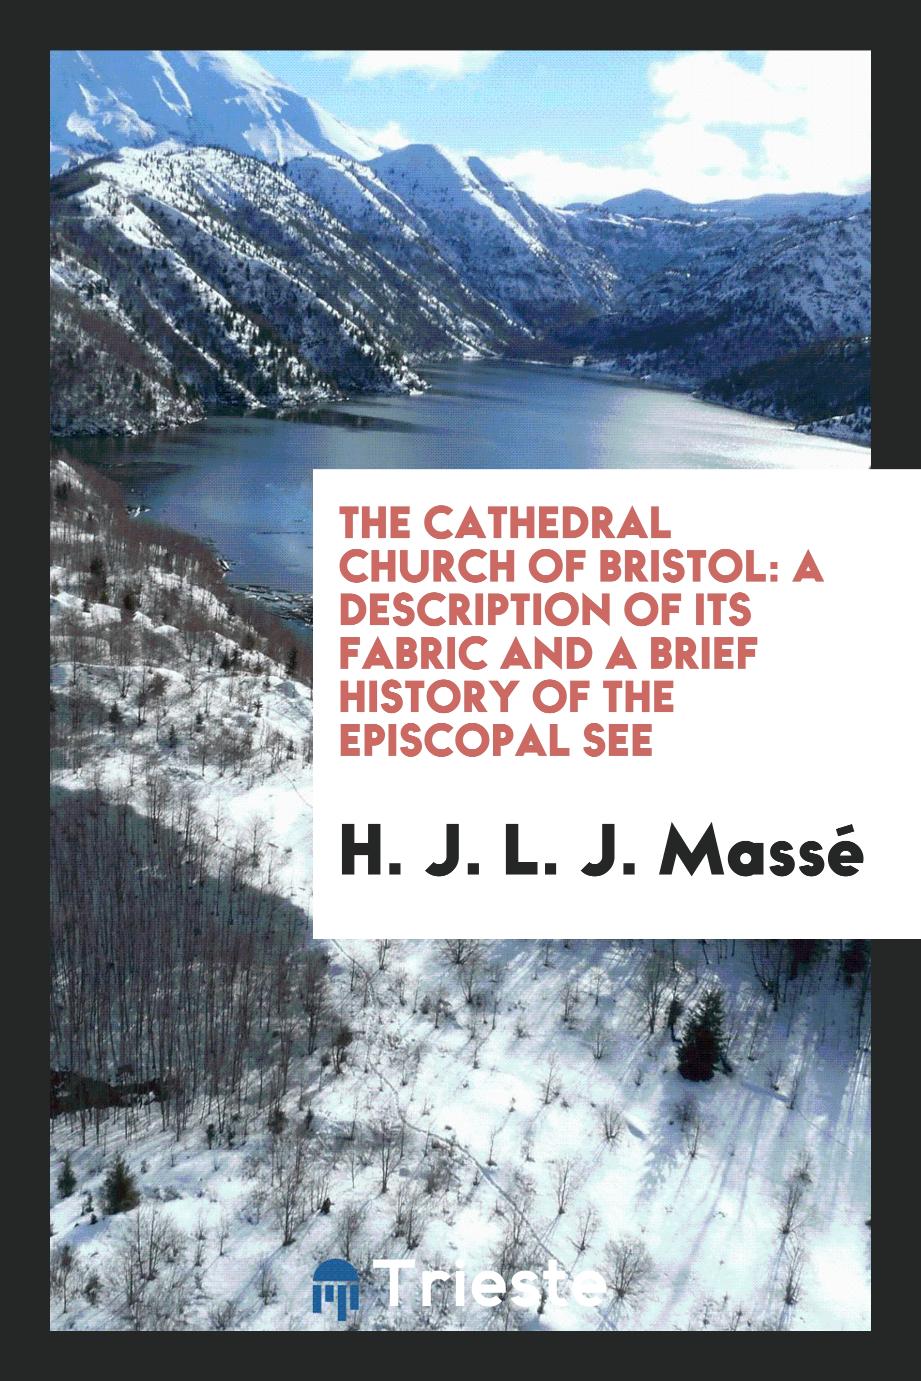 The Cathedral Church of Bristol: A Description of Its Fabric and a Brief History of the Episcopal See